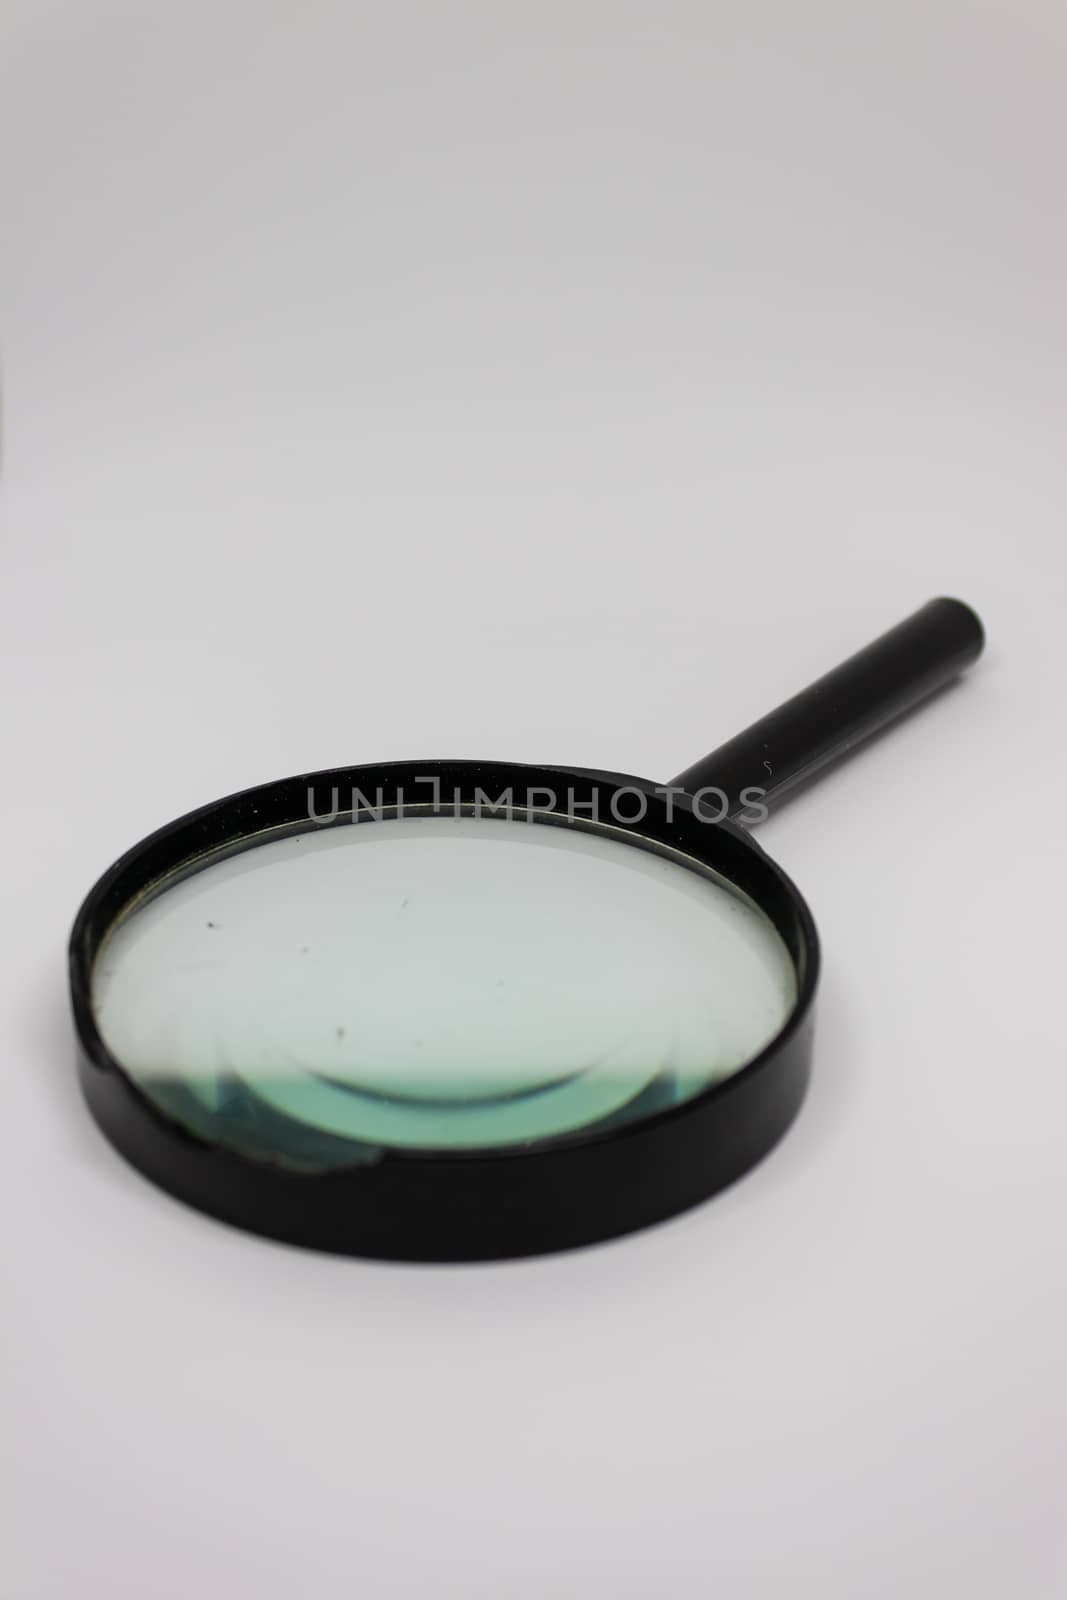 a closeup shoot from magnifying glass with white background.